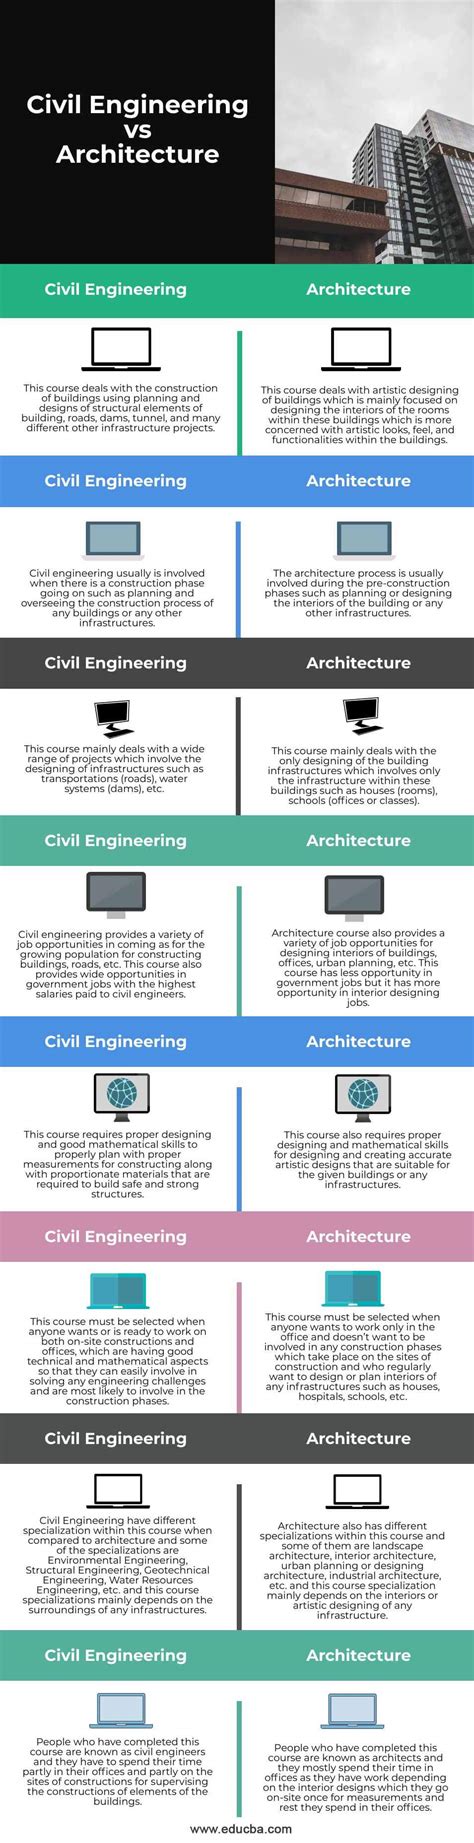 Civil Engineering Vs Architecture Top 8 Differences You Should Know